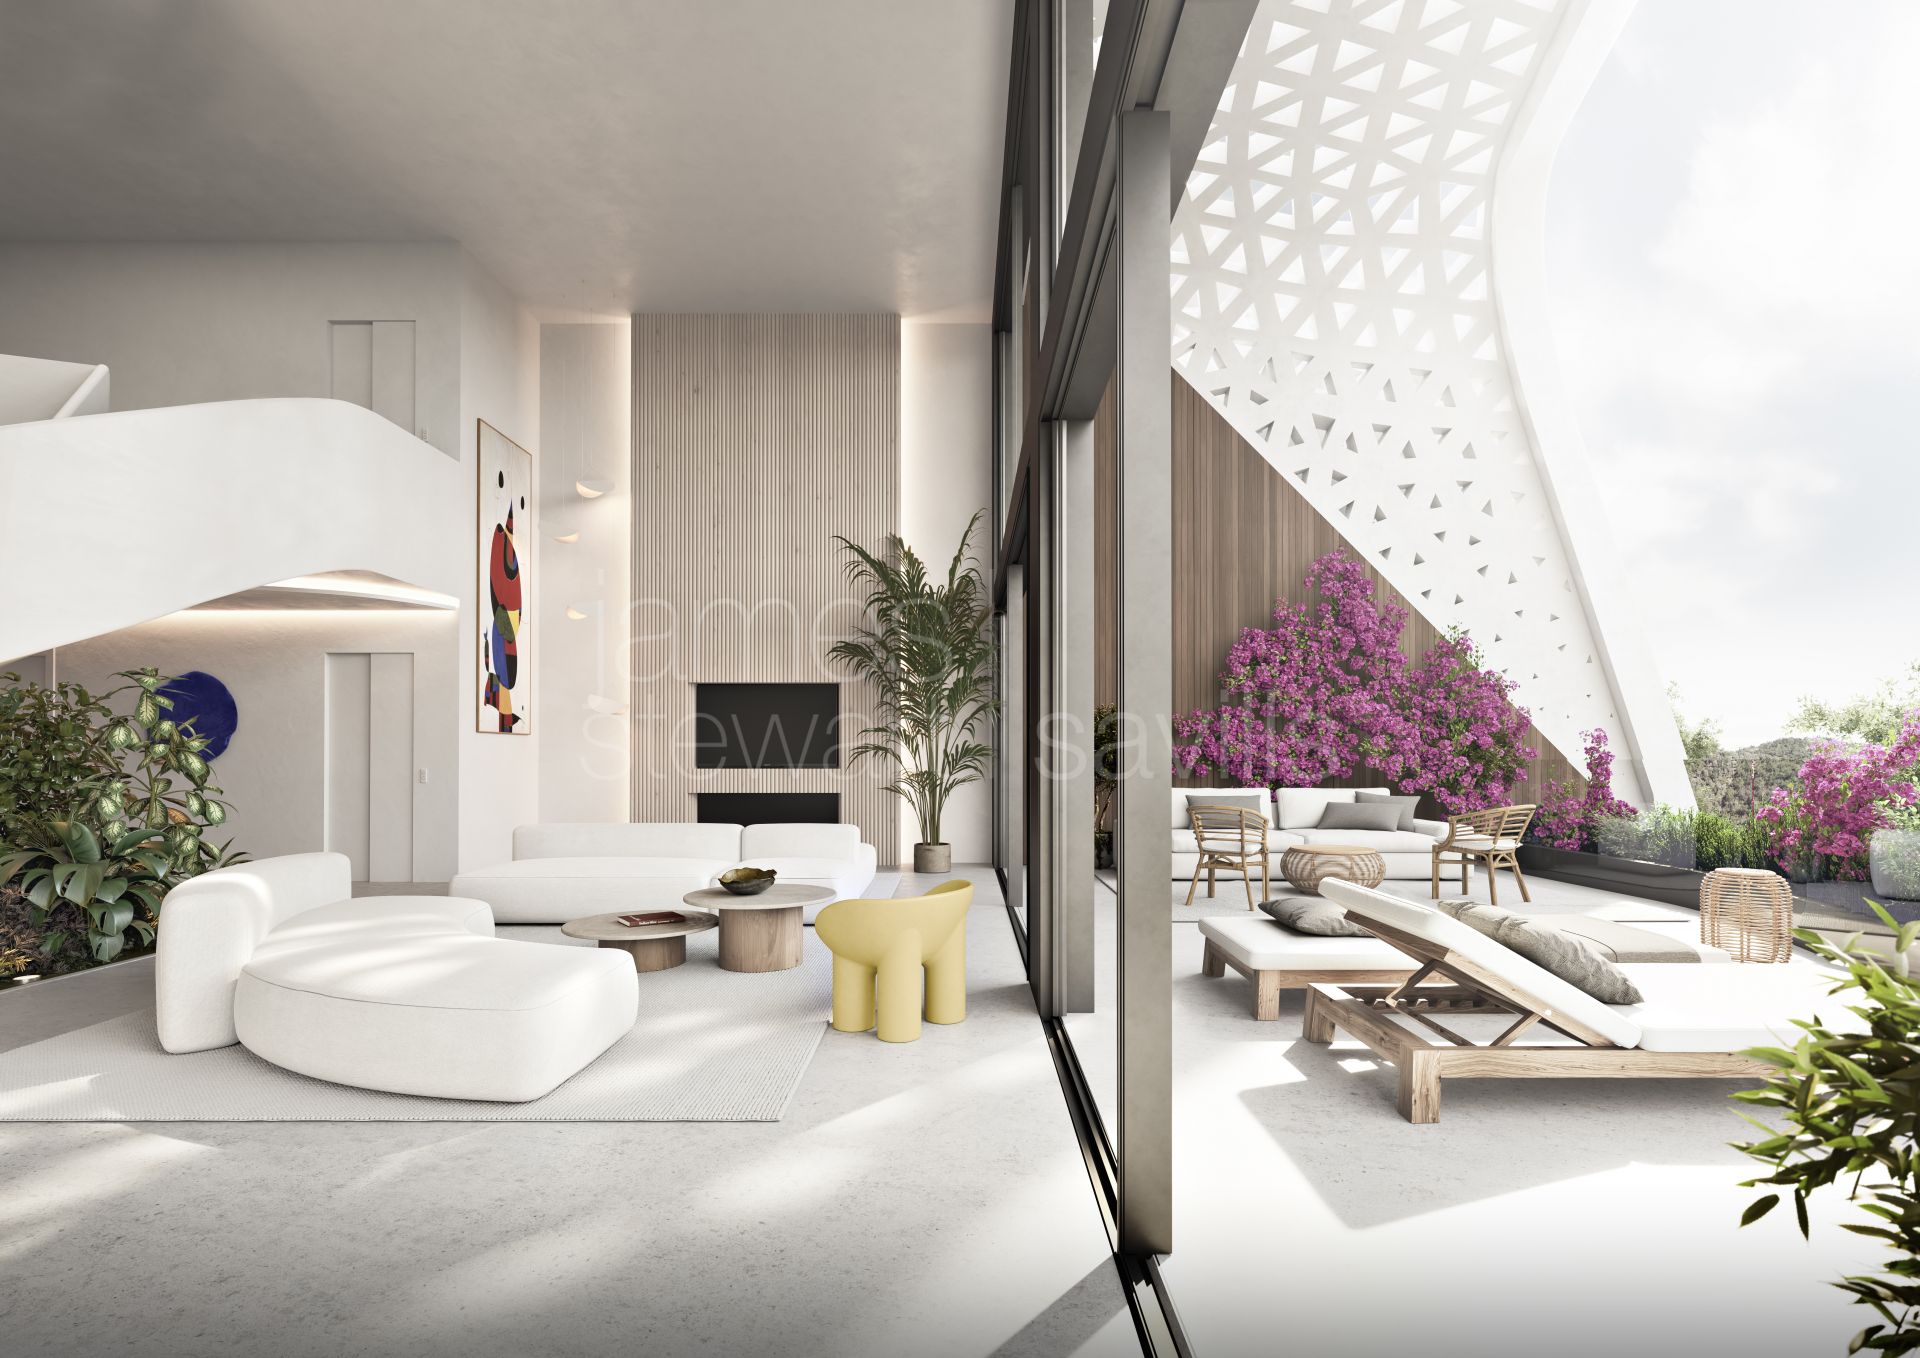 Fabulous new project of futuristic apartments next to Sotogrande - two bedroom prices from € 795,000